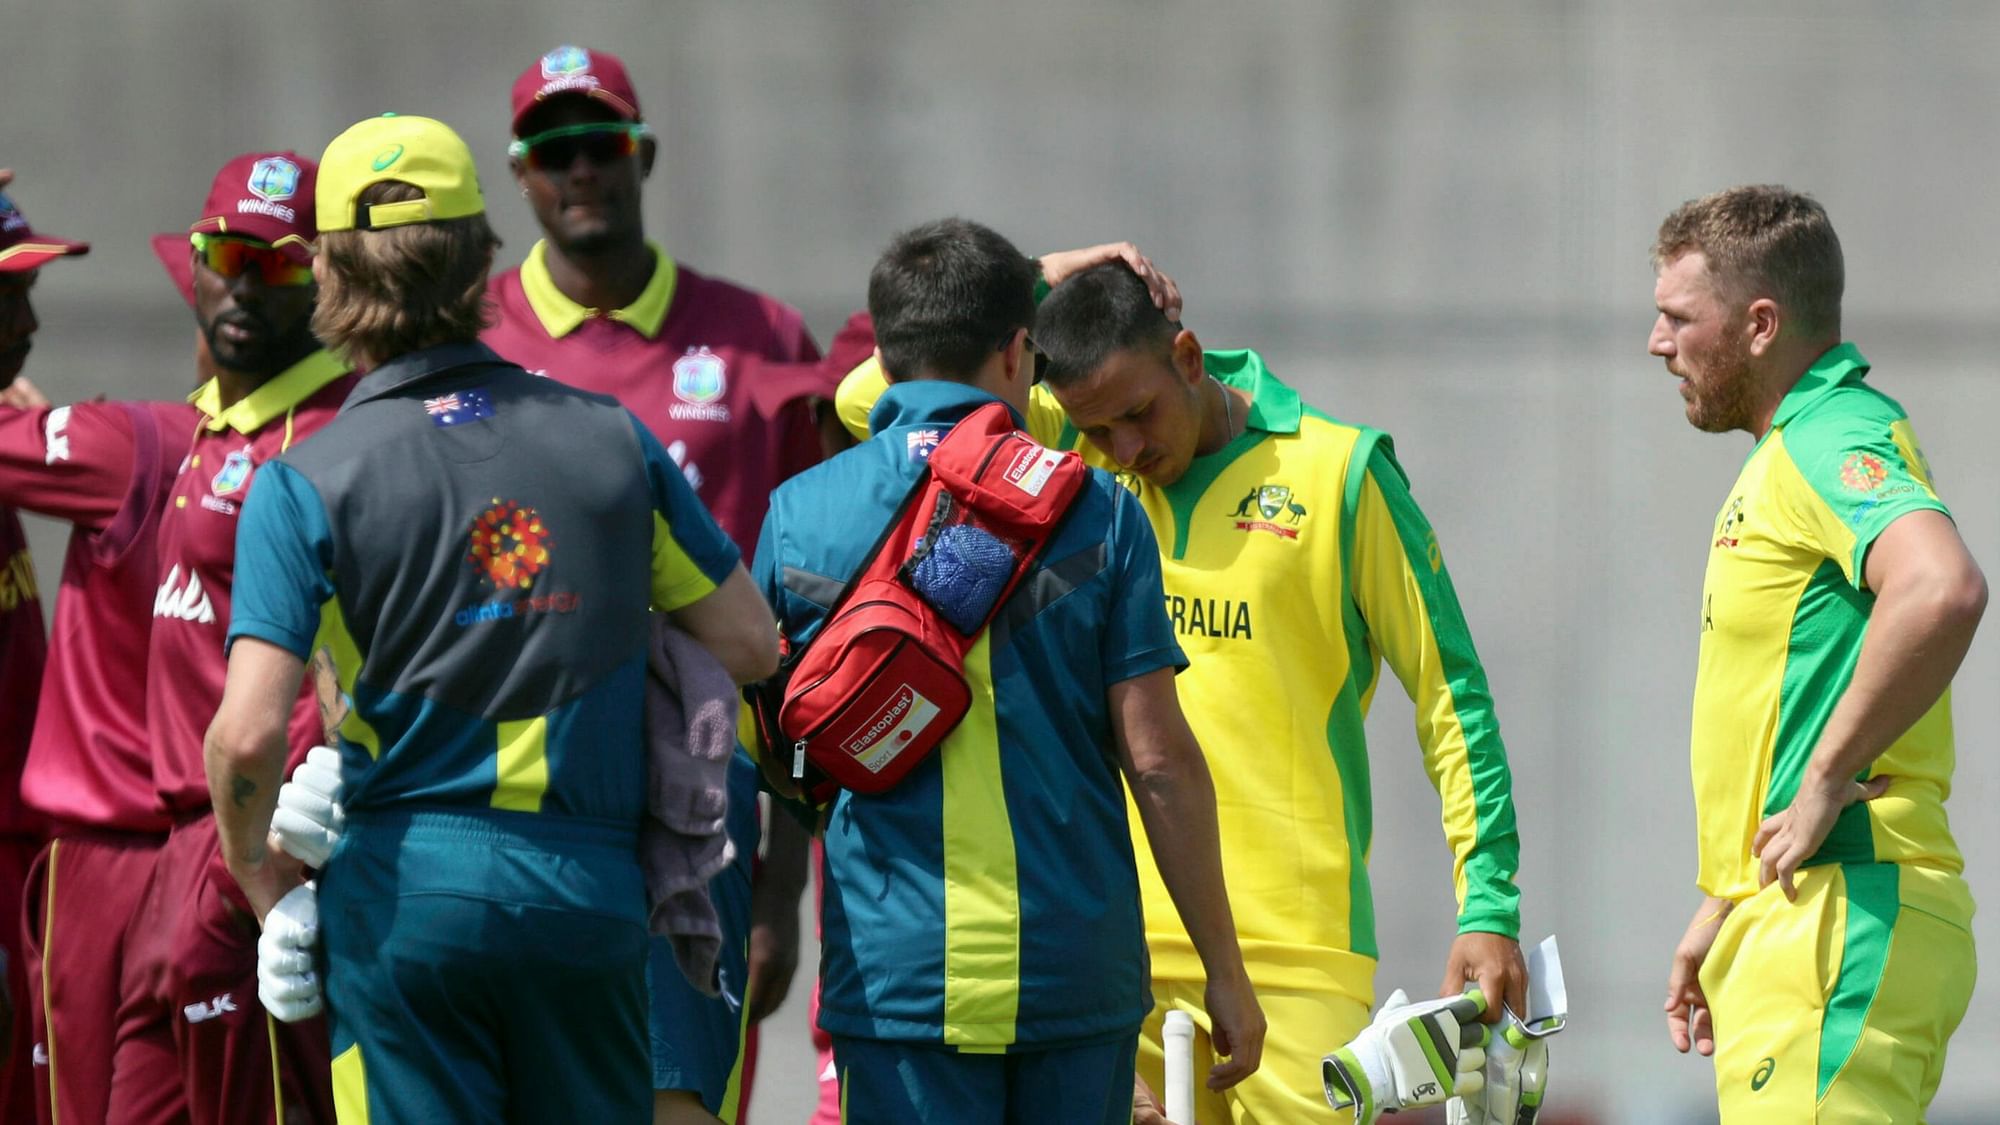 Australia’s Usman Khawaja (2nd right) rubs his head after being hit by a bouncer by West Indies’ Andre Russell during the World Cup warm-up match at the Nursery Ground, Southampton, England, Wednesday May 22, 2019.&nbsp;